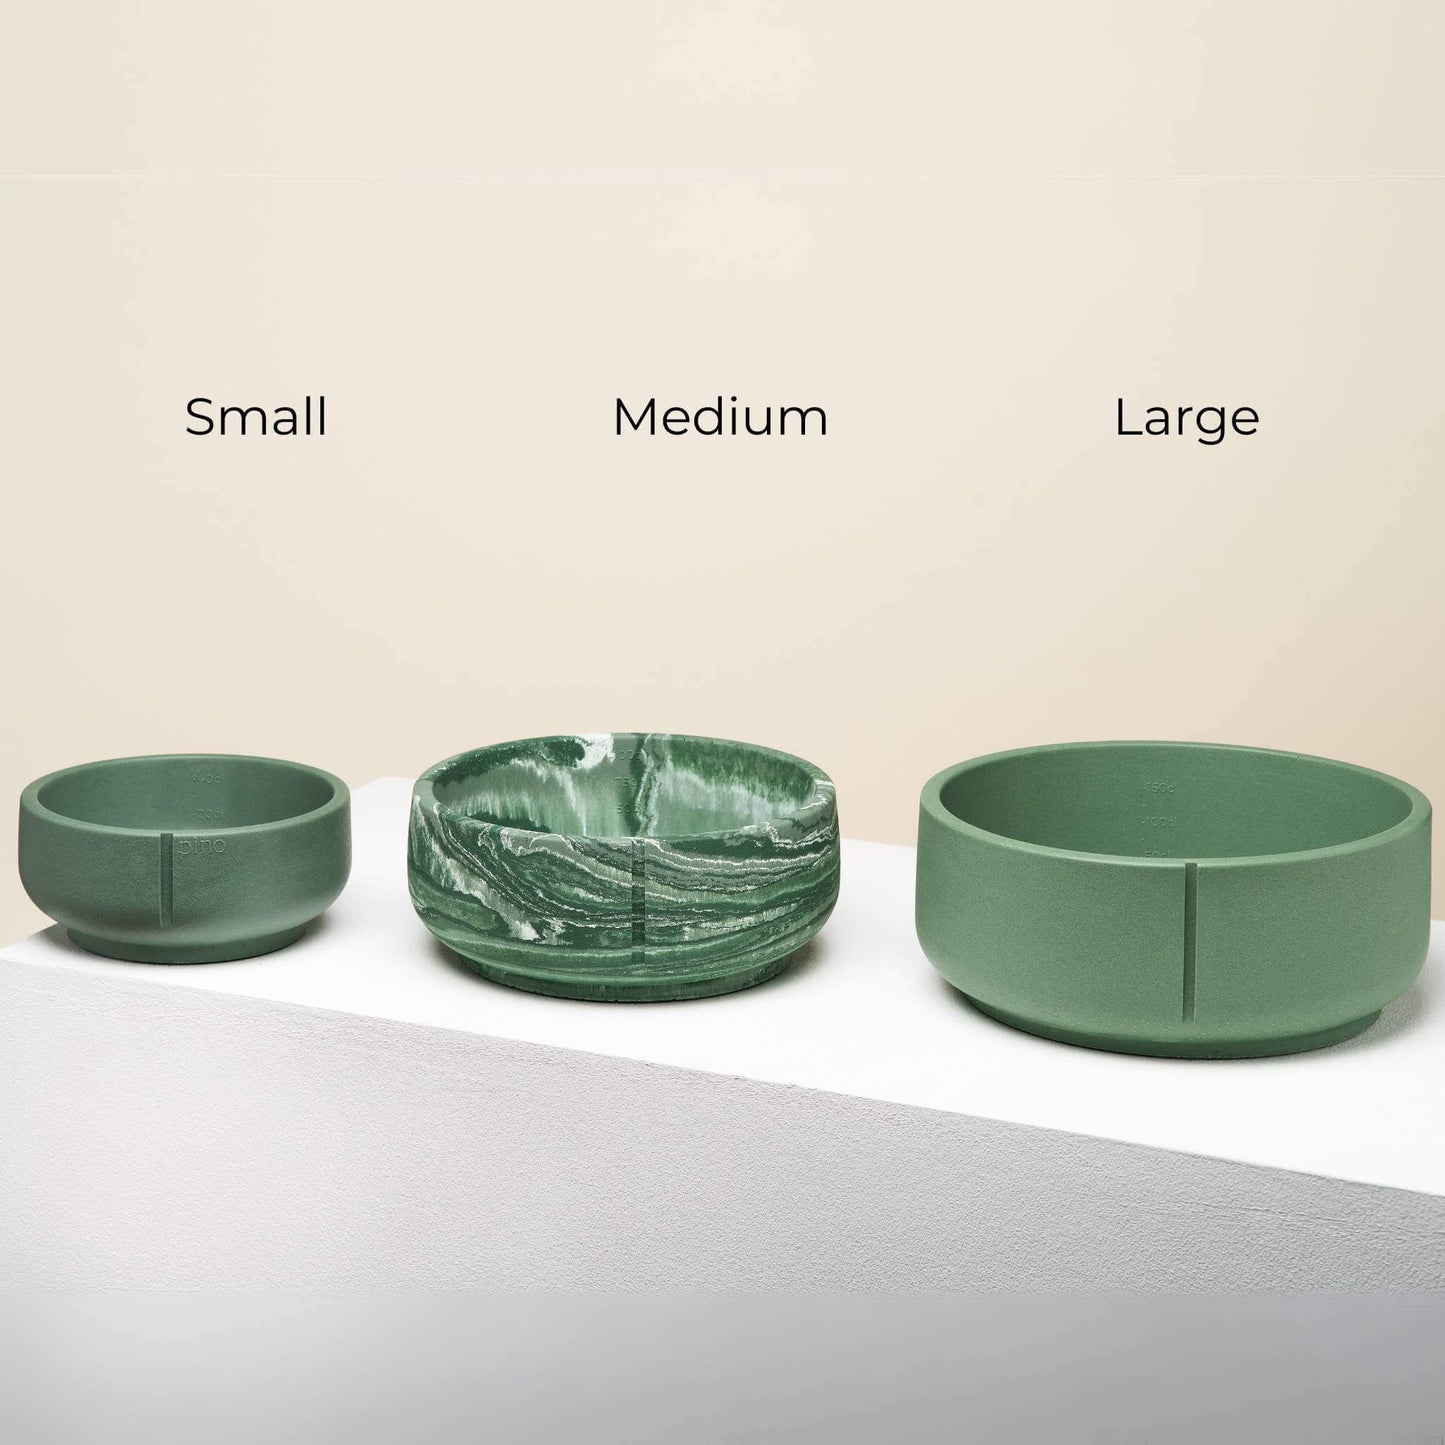 Three duck green bowls next to each other in three different sizes